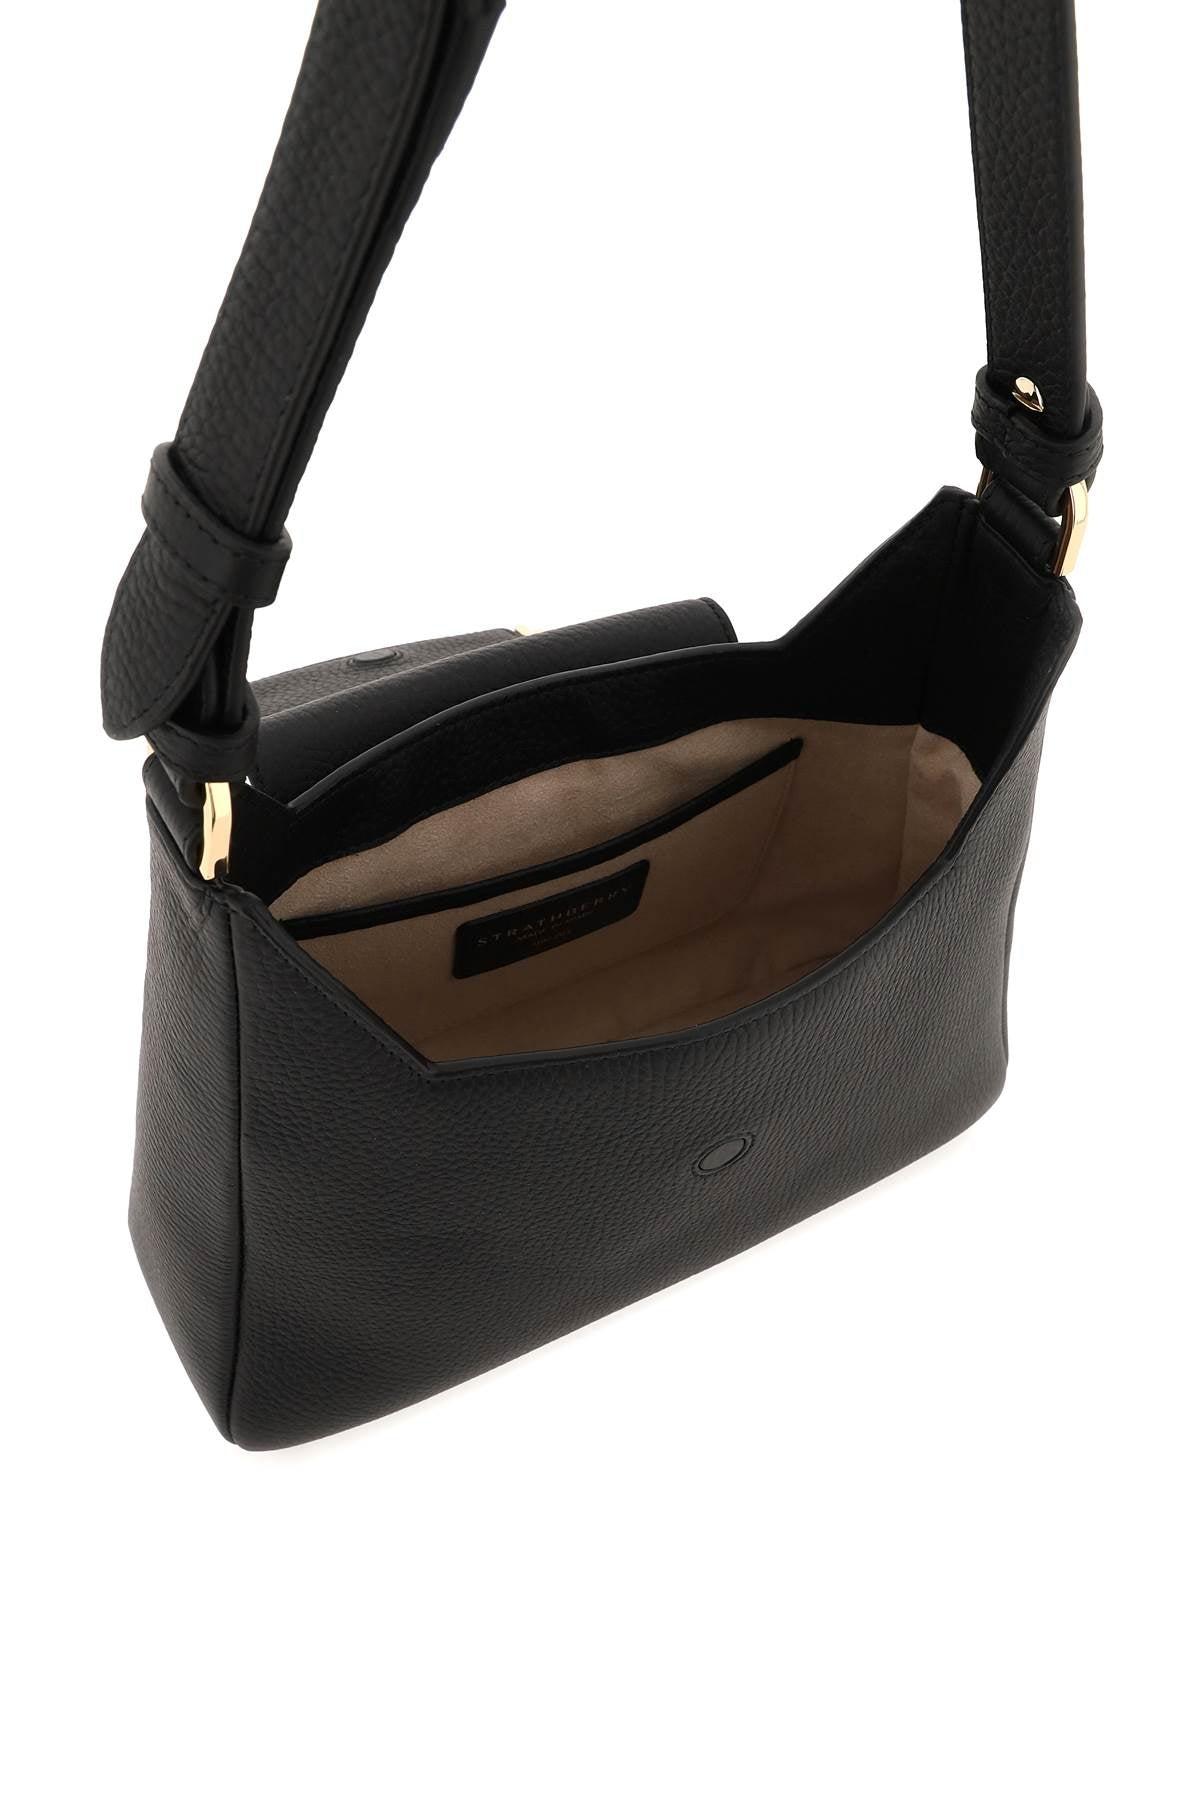 Shop Strathberry Multrees Leather Hobo Bag